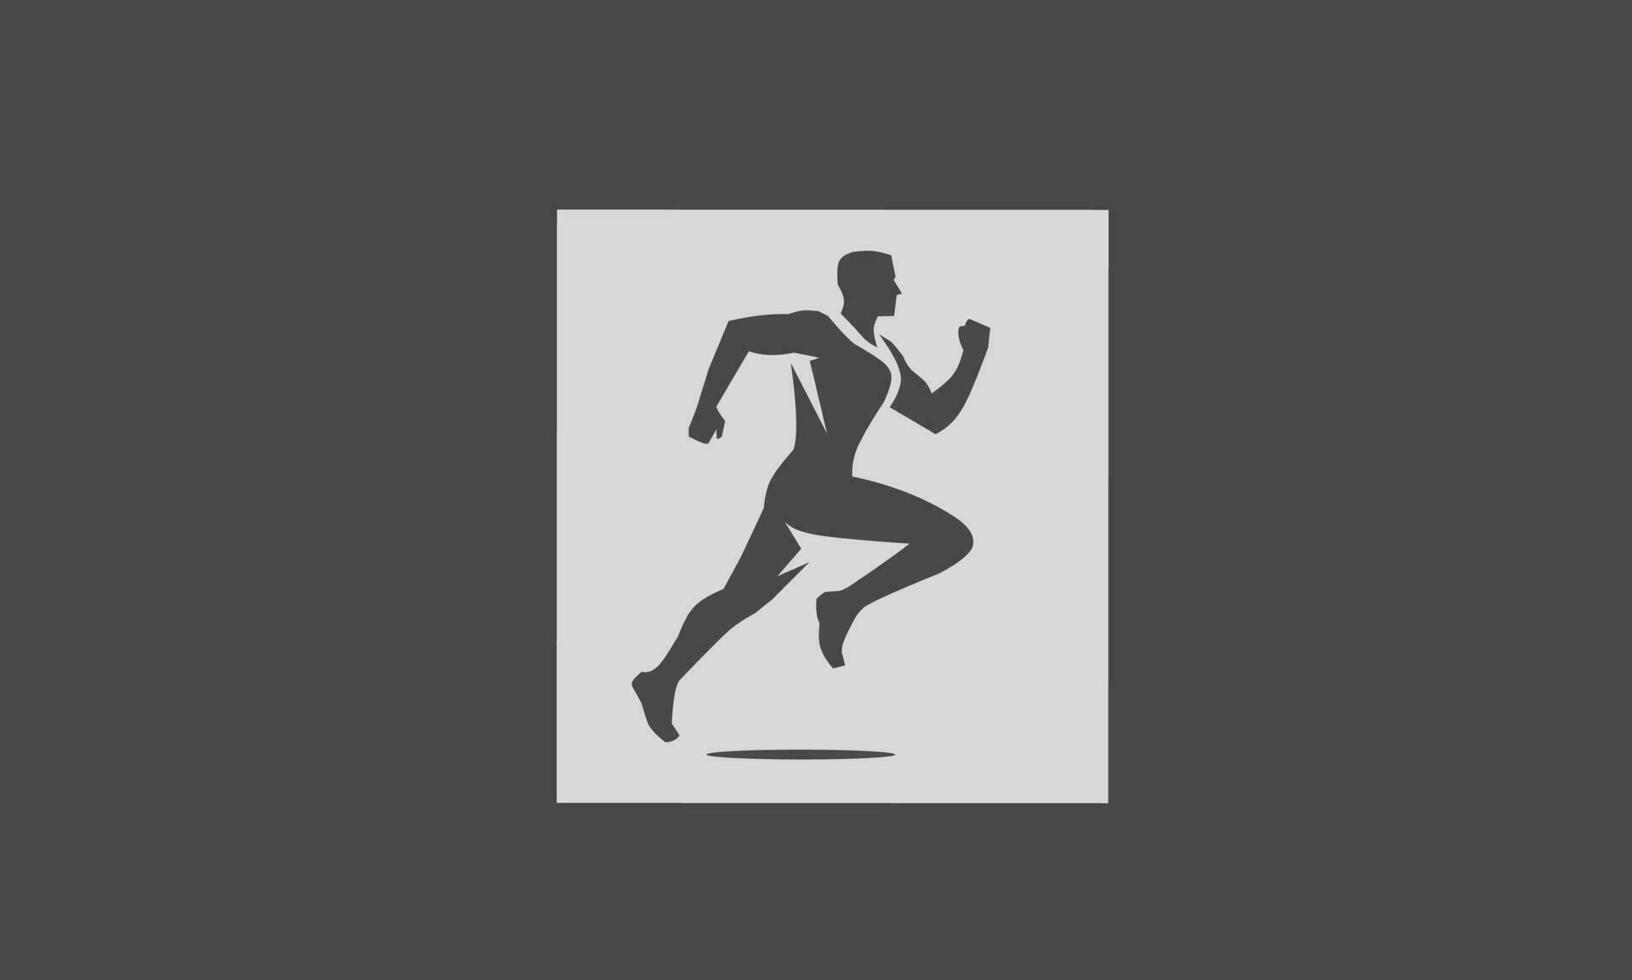 Logo design of a black silhouette of a person running forward showing the spirit of running to achieve a goal. The running person logo symbol expresses energy, joy and freedom. vector